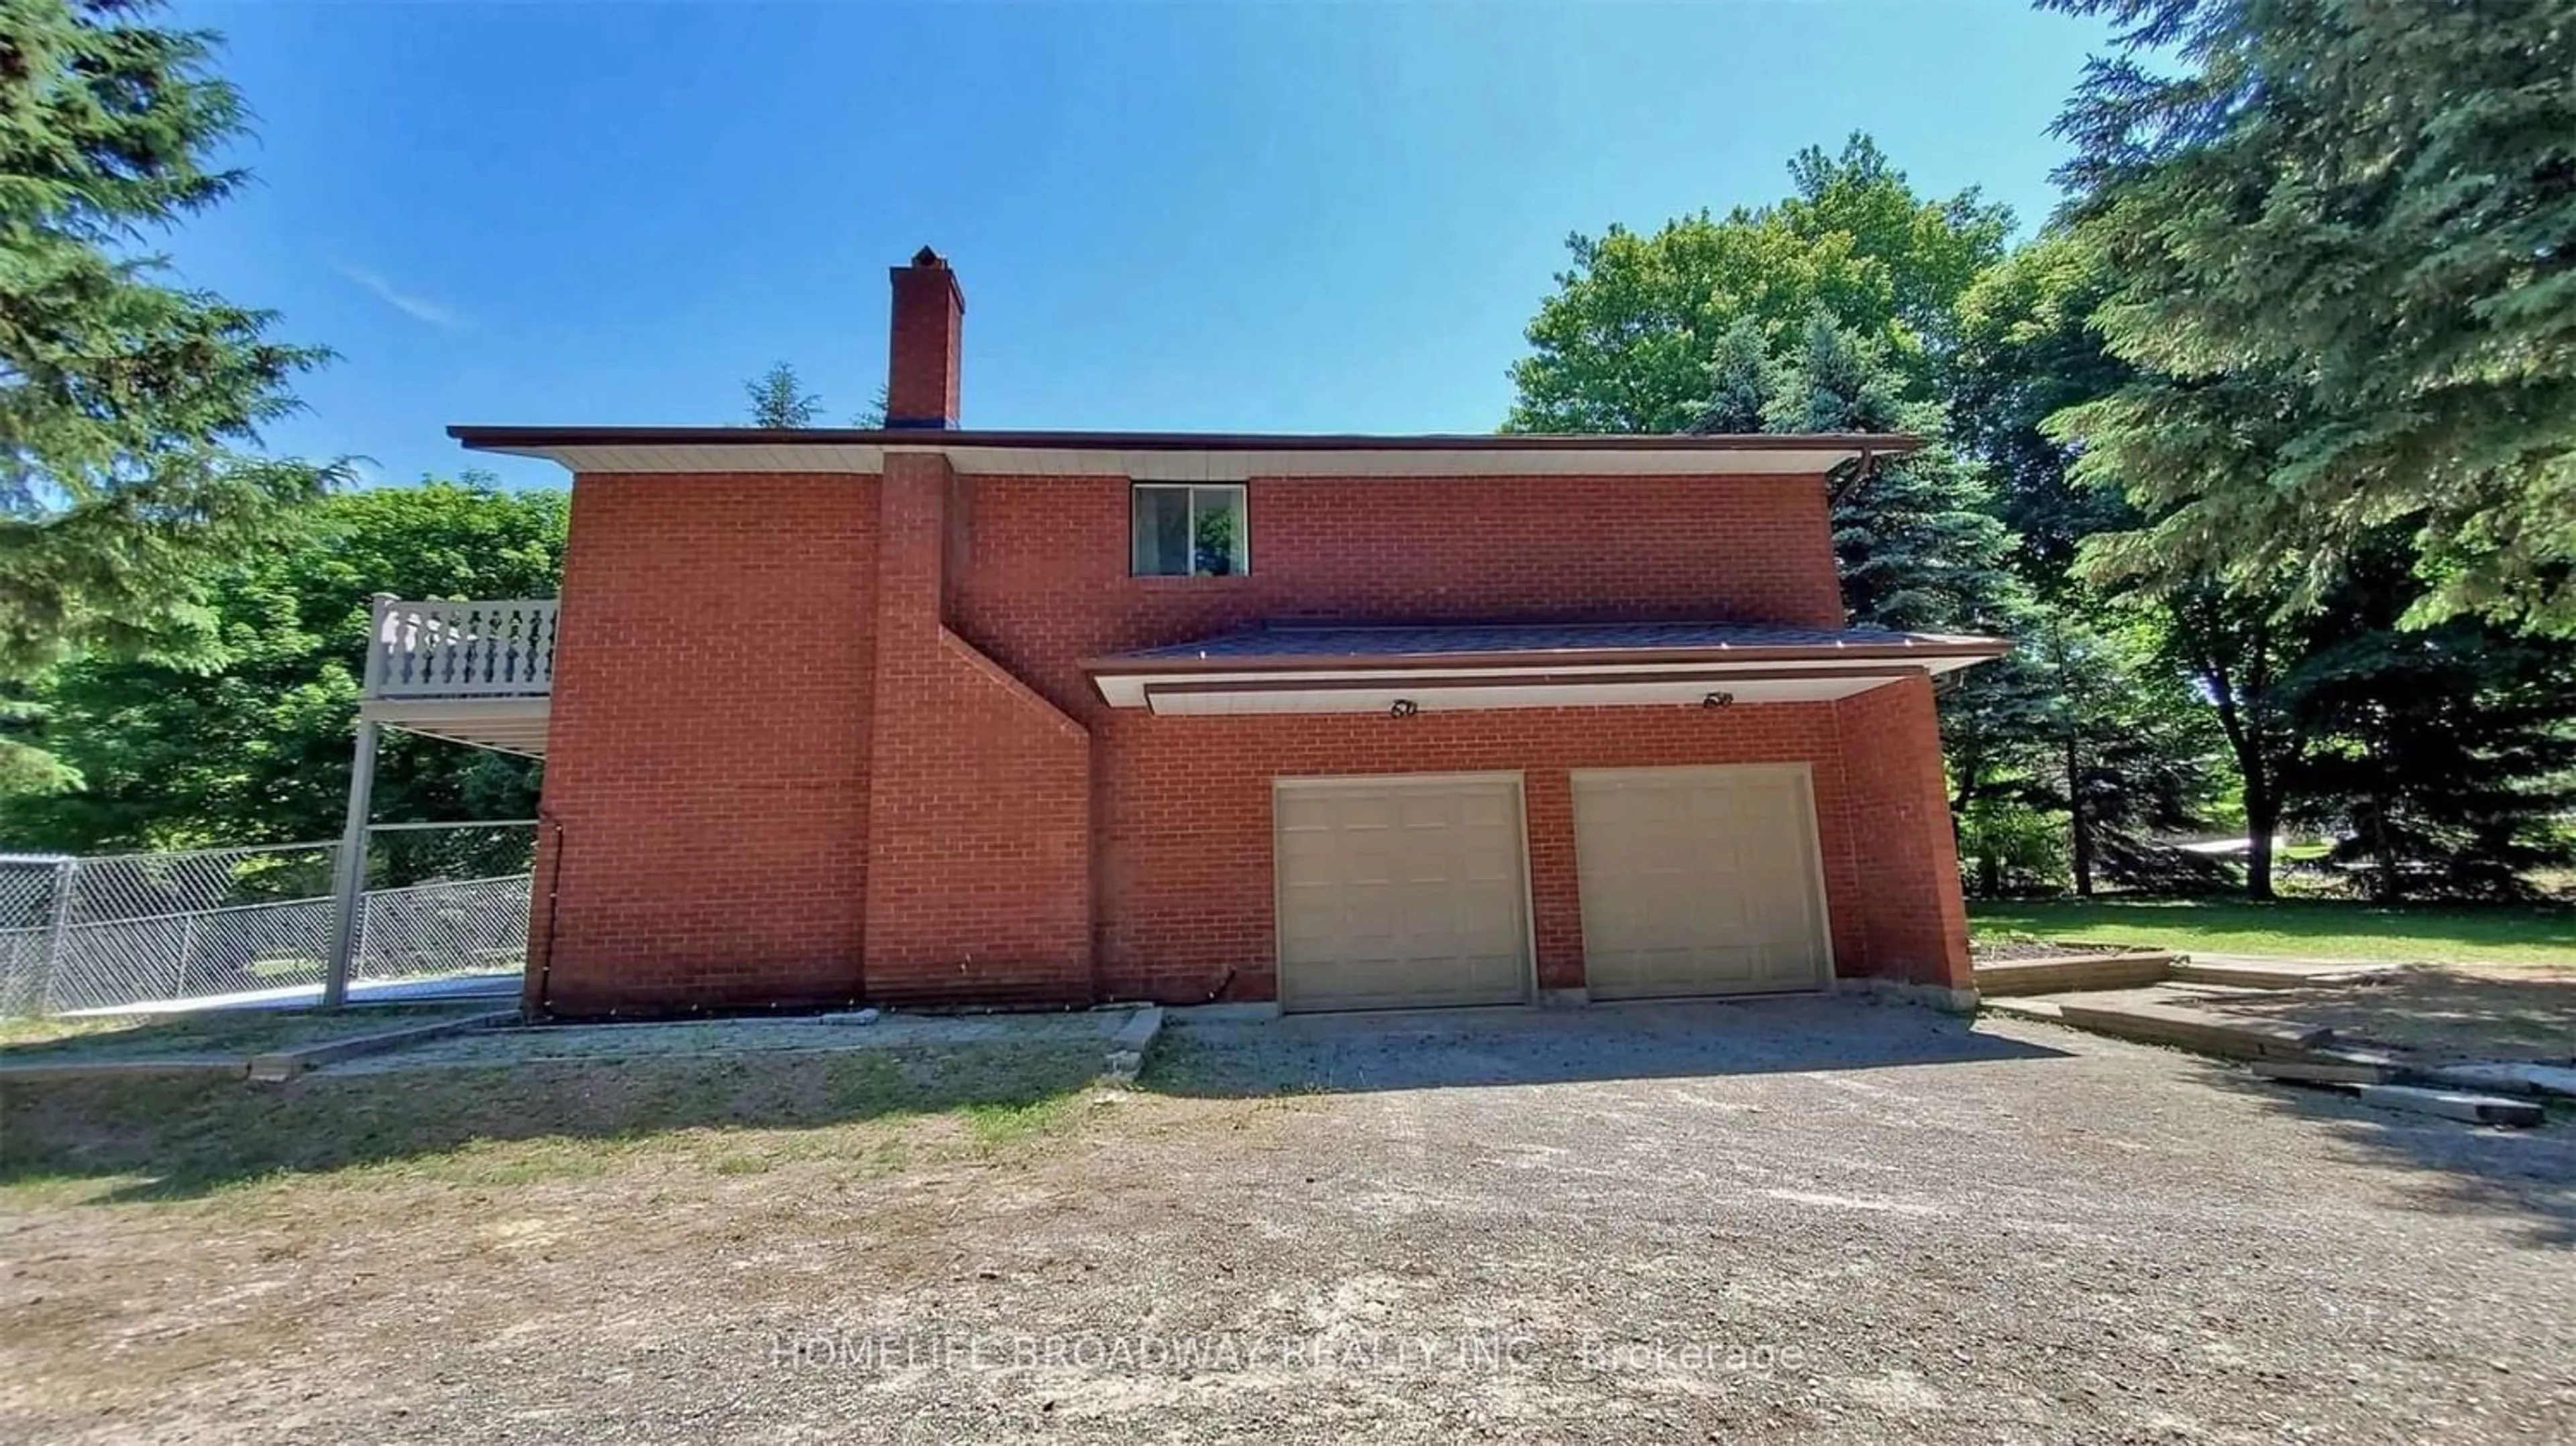 Frontside or backside of a home for 442 Sunset Beach Rd, Richmond Hill Ontario L4E 3J2